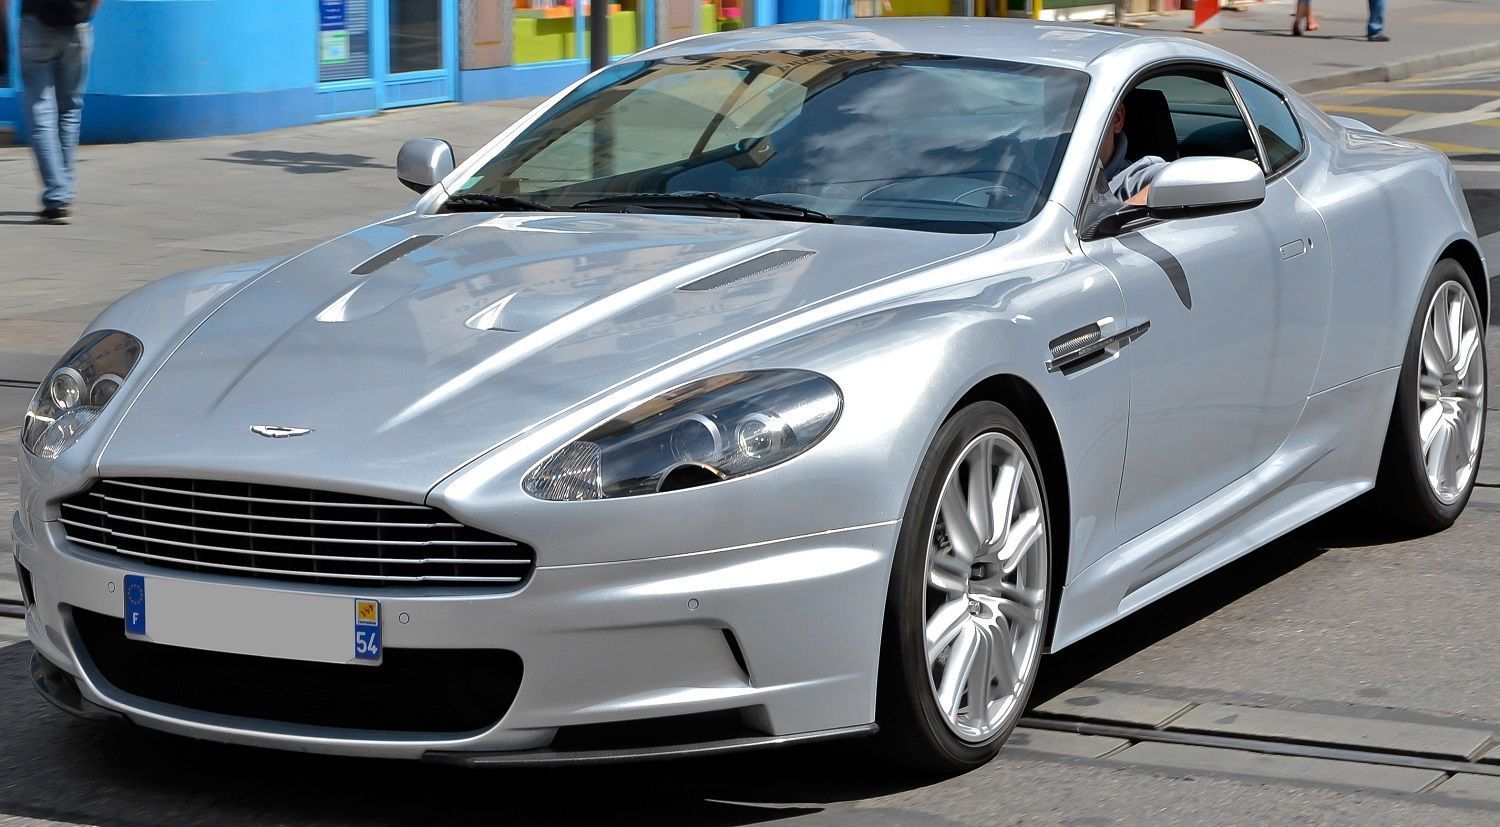 https://images.lifestyleasia.com/wp-content/uploads/sites/3/2022/09/17171548/aston_martin_dbs_-_flickr_-_alexandre_prevot_11_cropped.jpeg